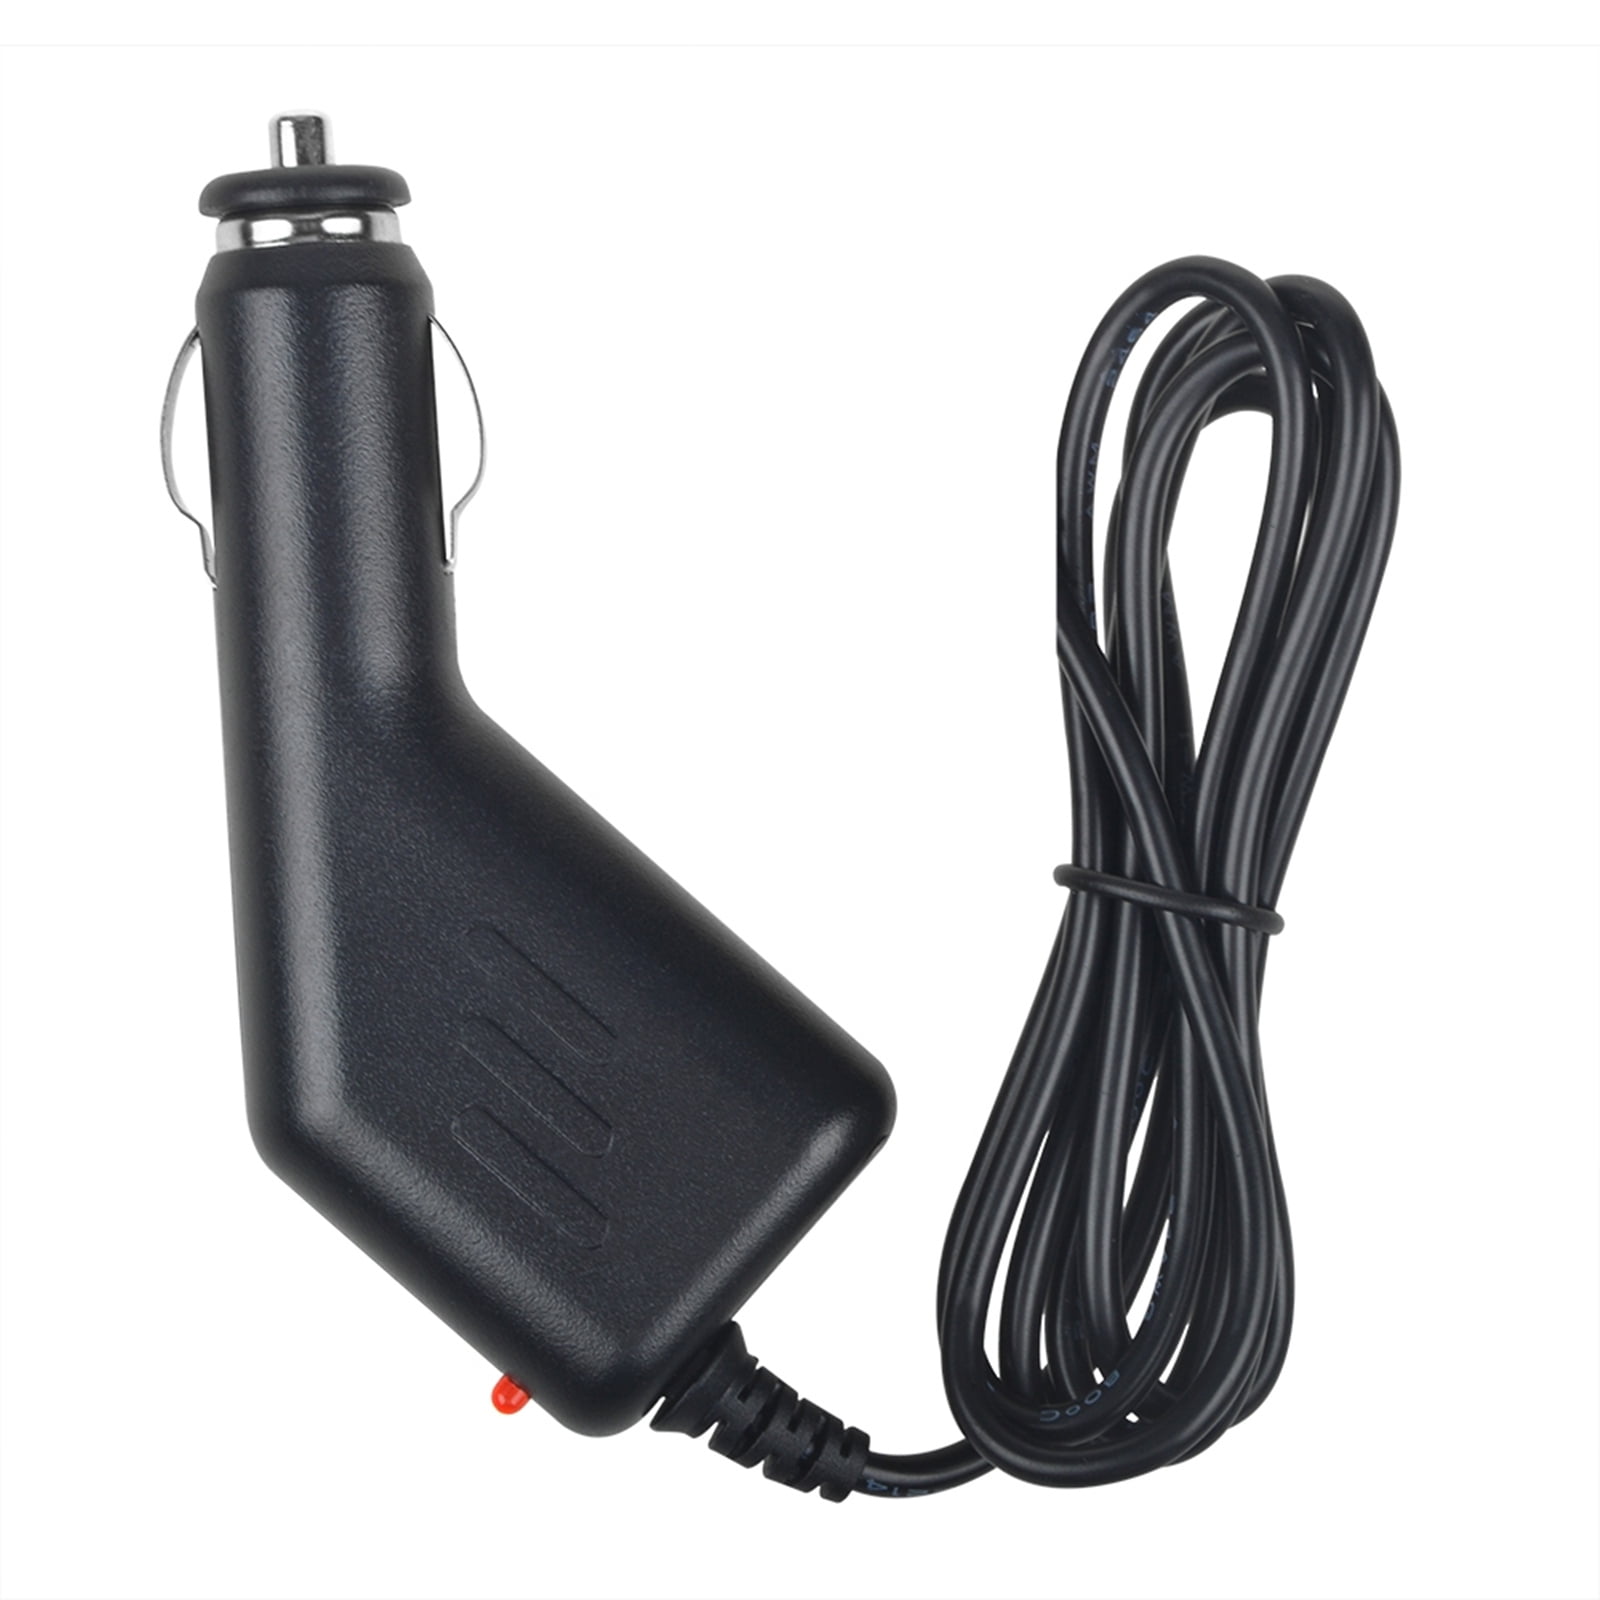 NEW Adapter For Wasp WWS550i Freedom Cordless Barcode Scanner DC Power Supply 